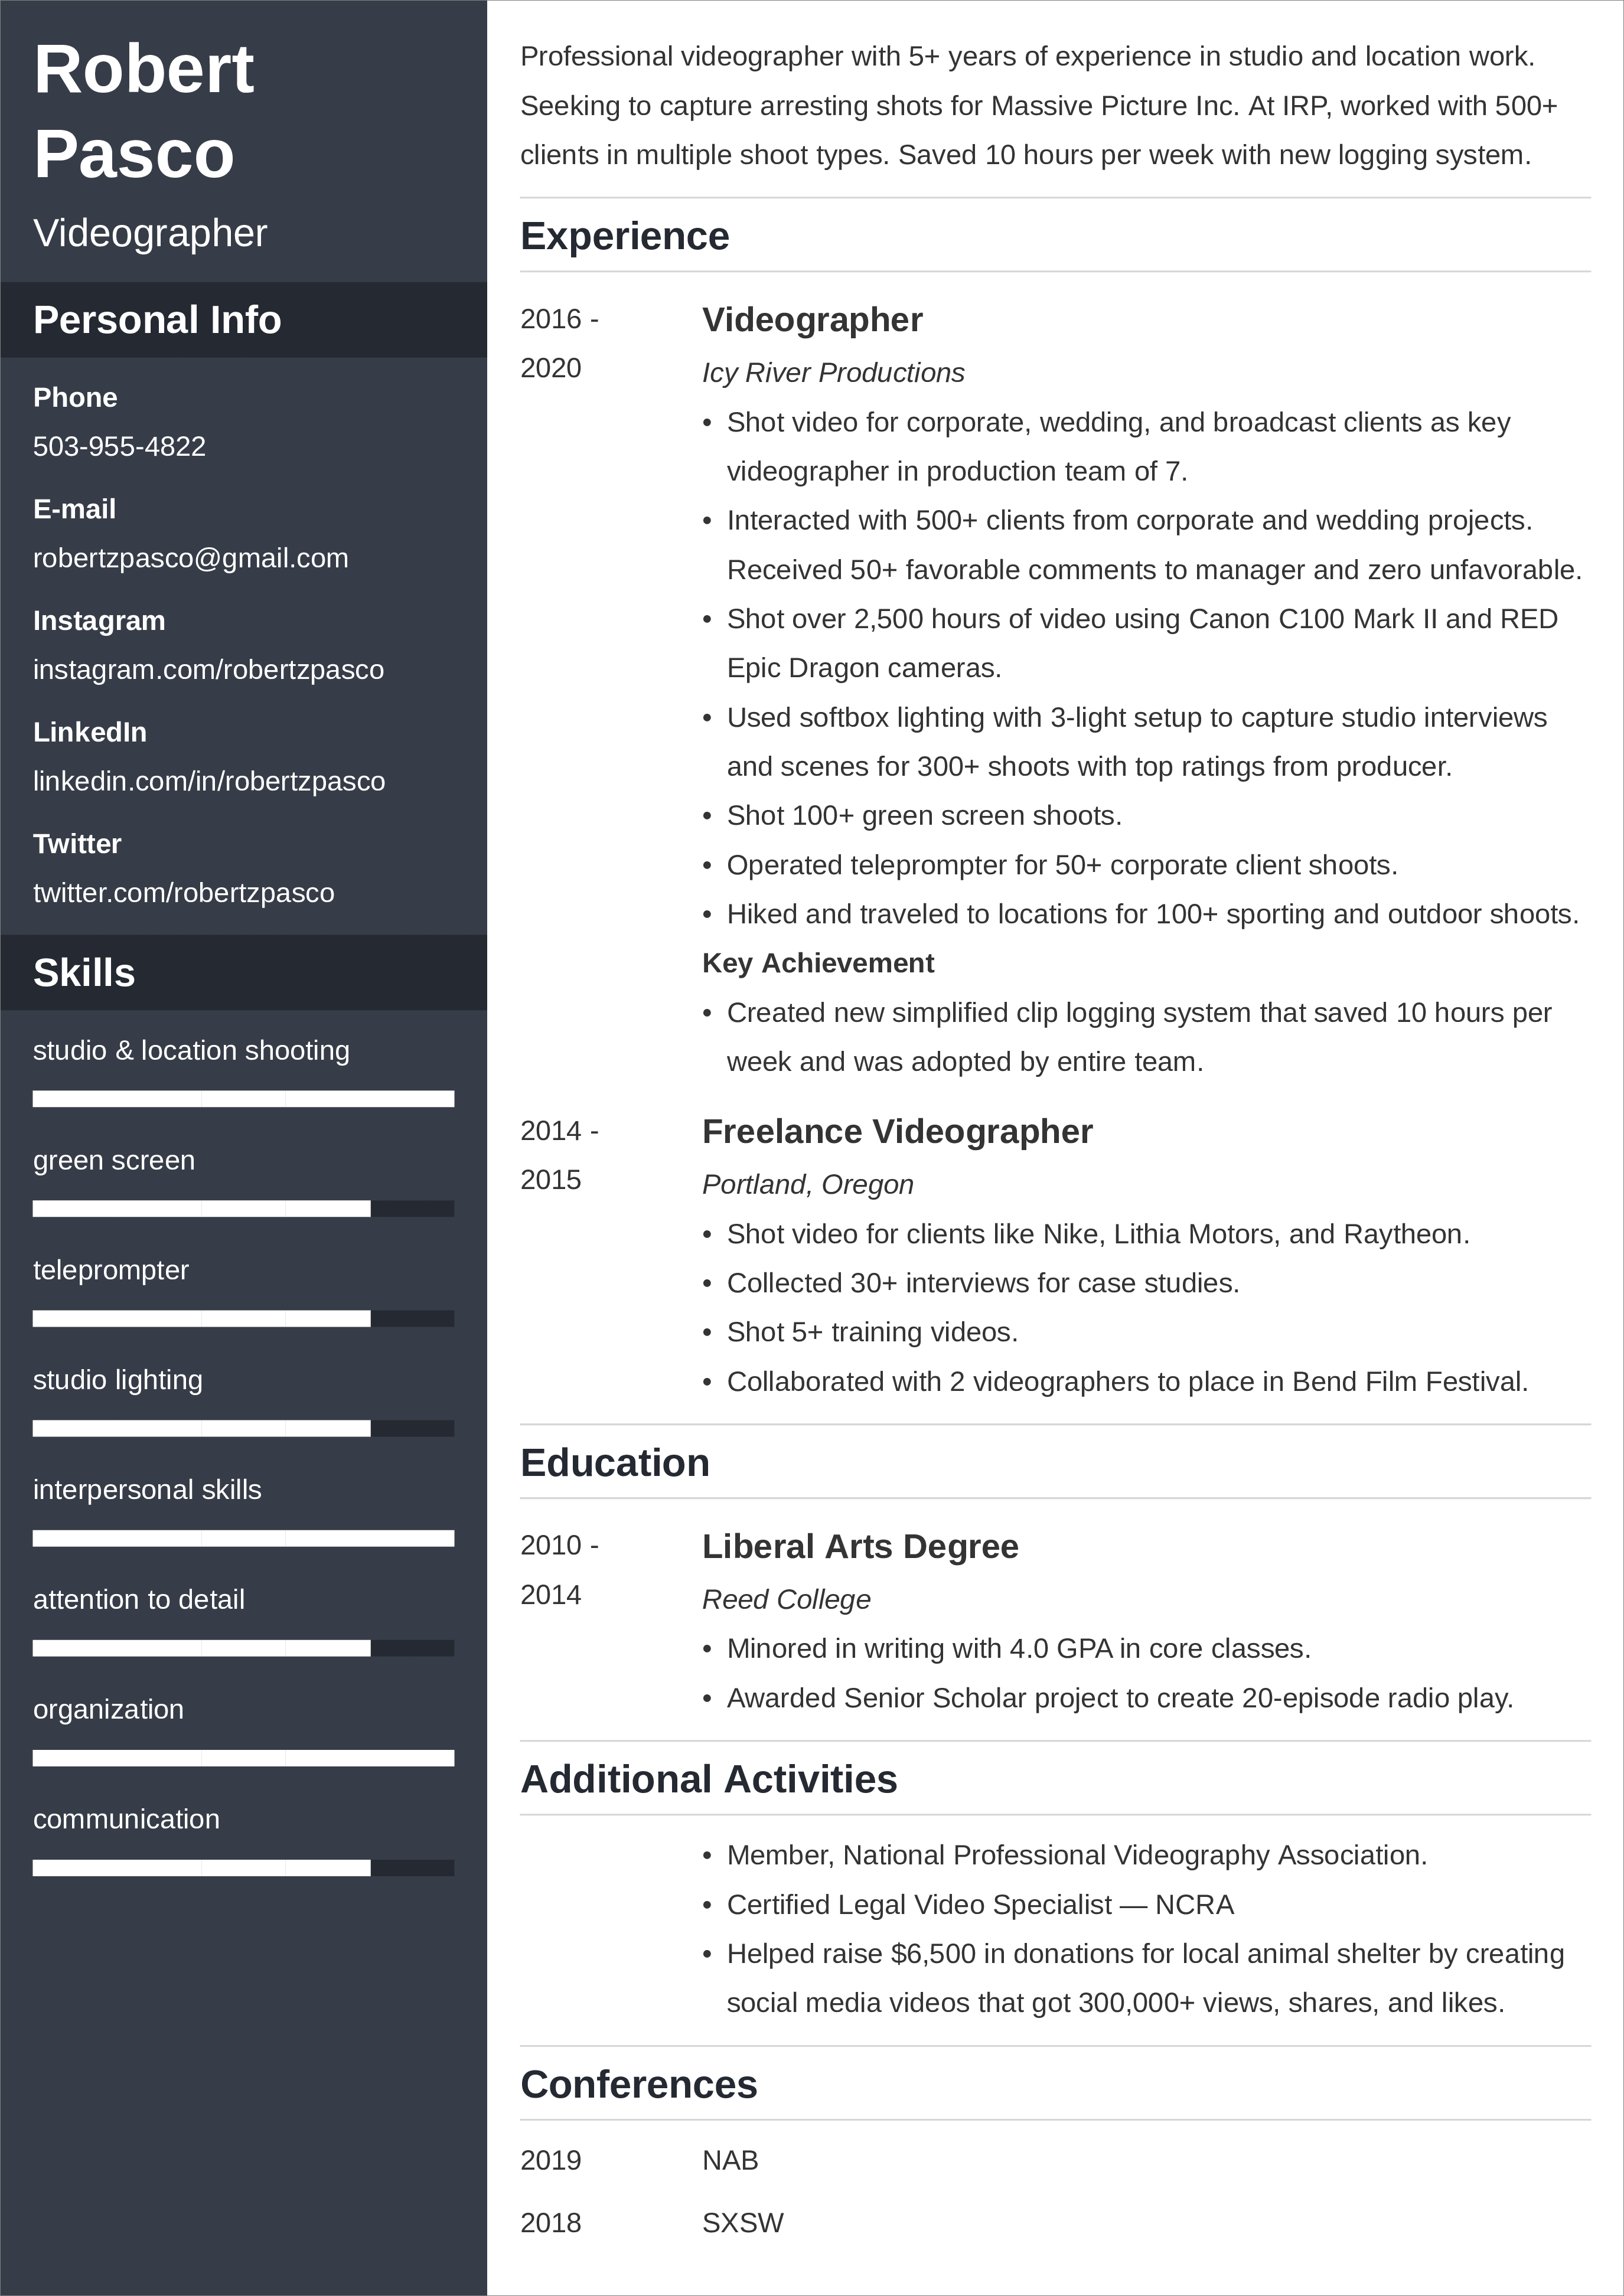 Videographer CV Examples and Tips (Also Freelance)